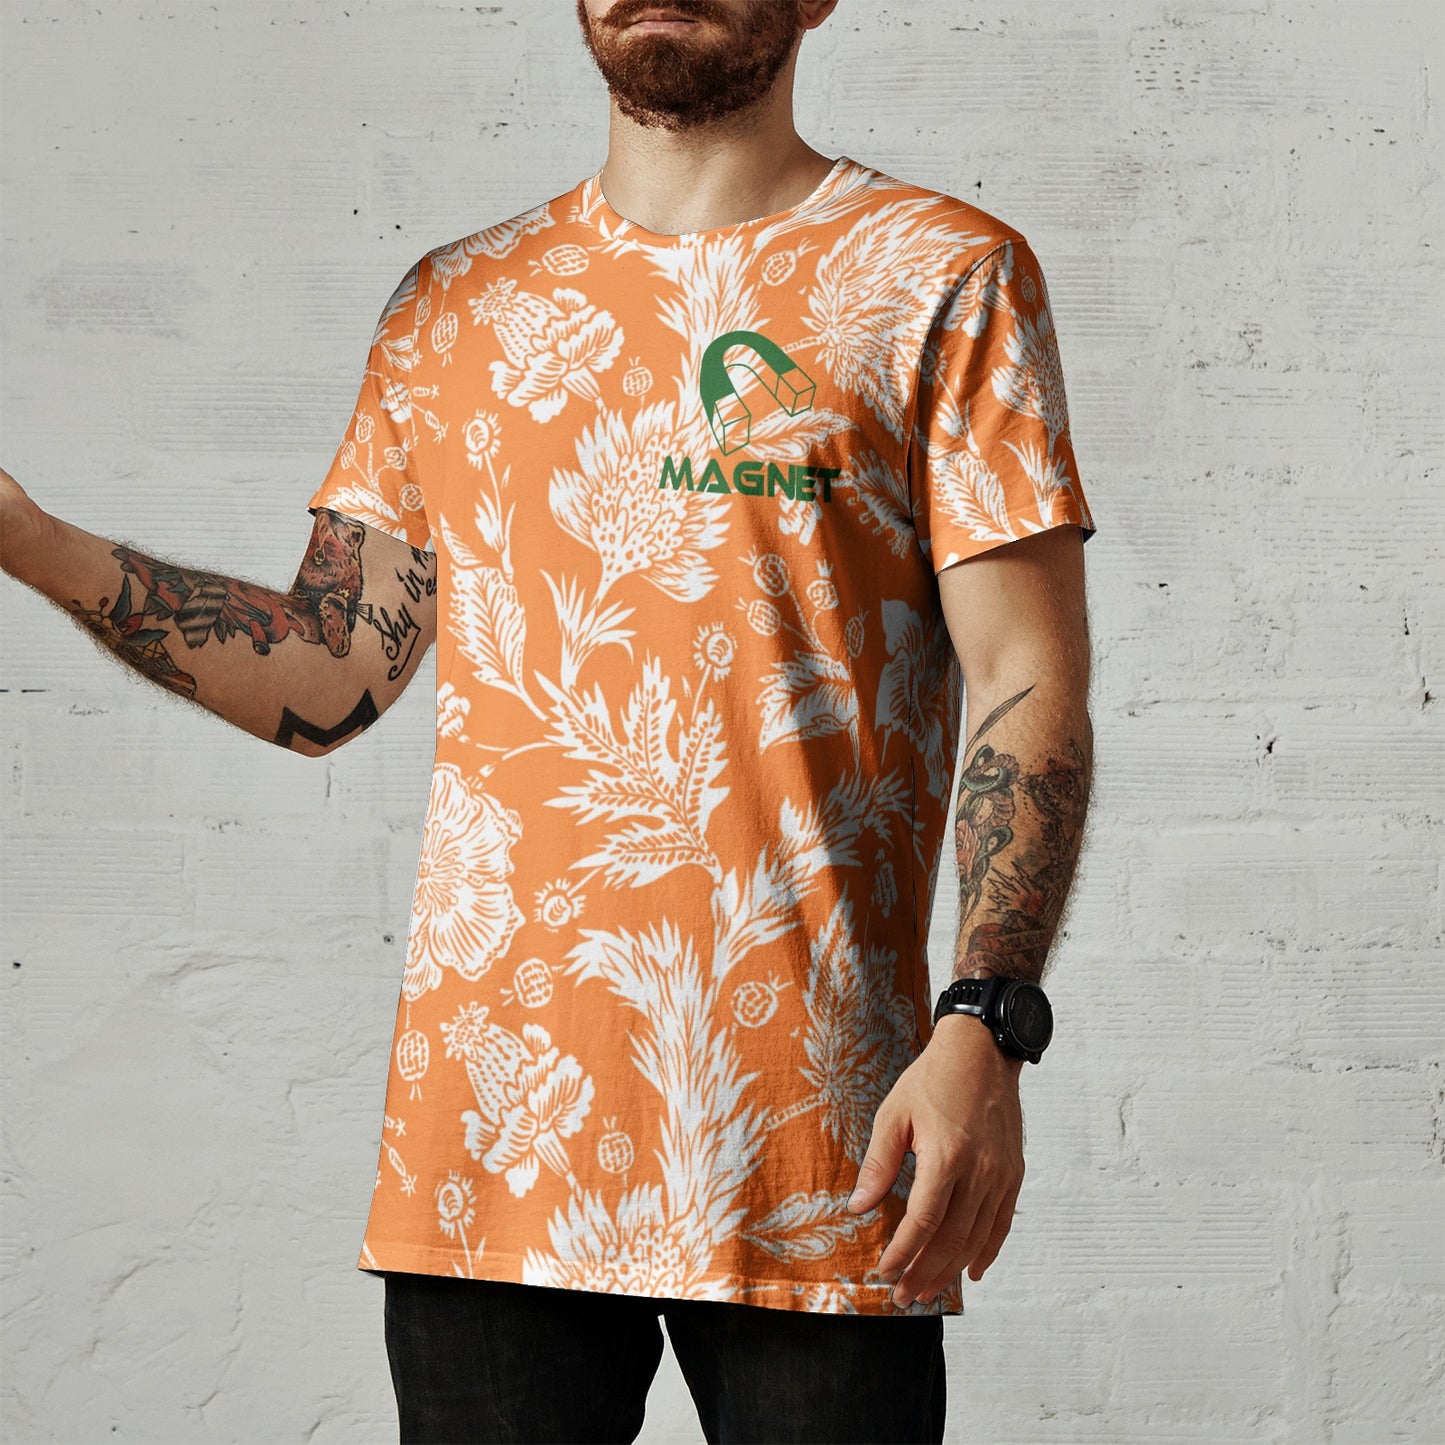 Magnet Hawaii Men's All-Over Print T-shirts